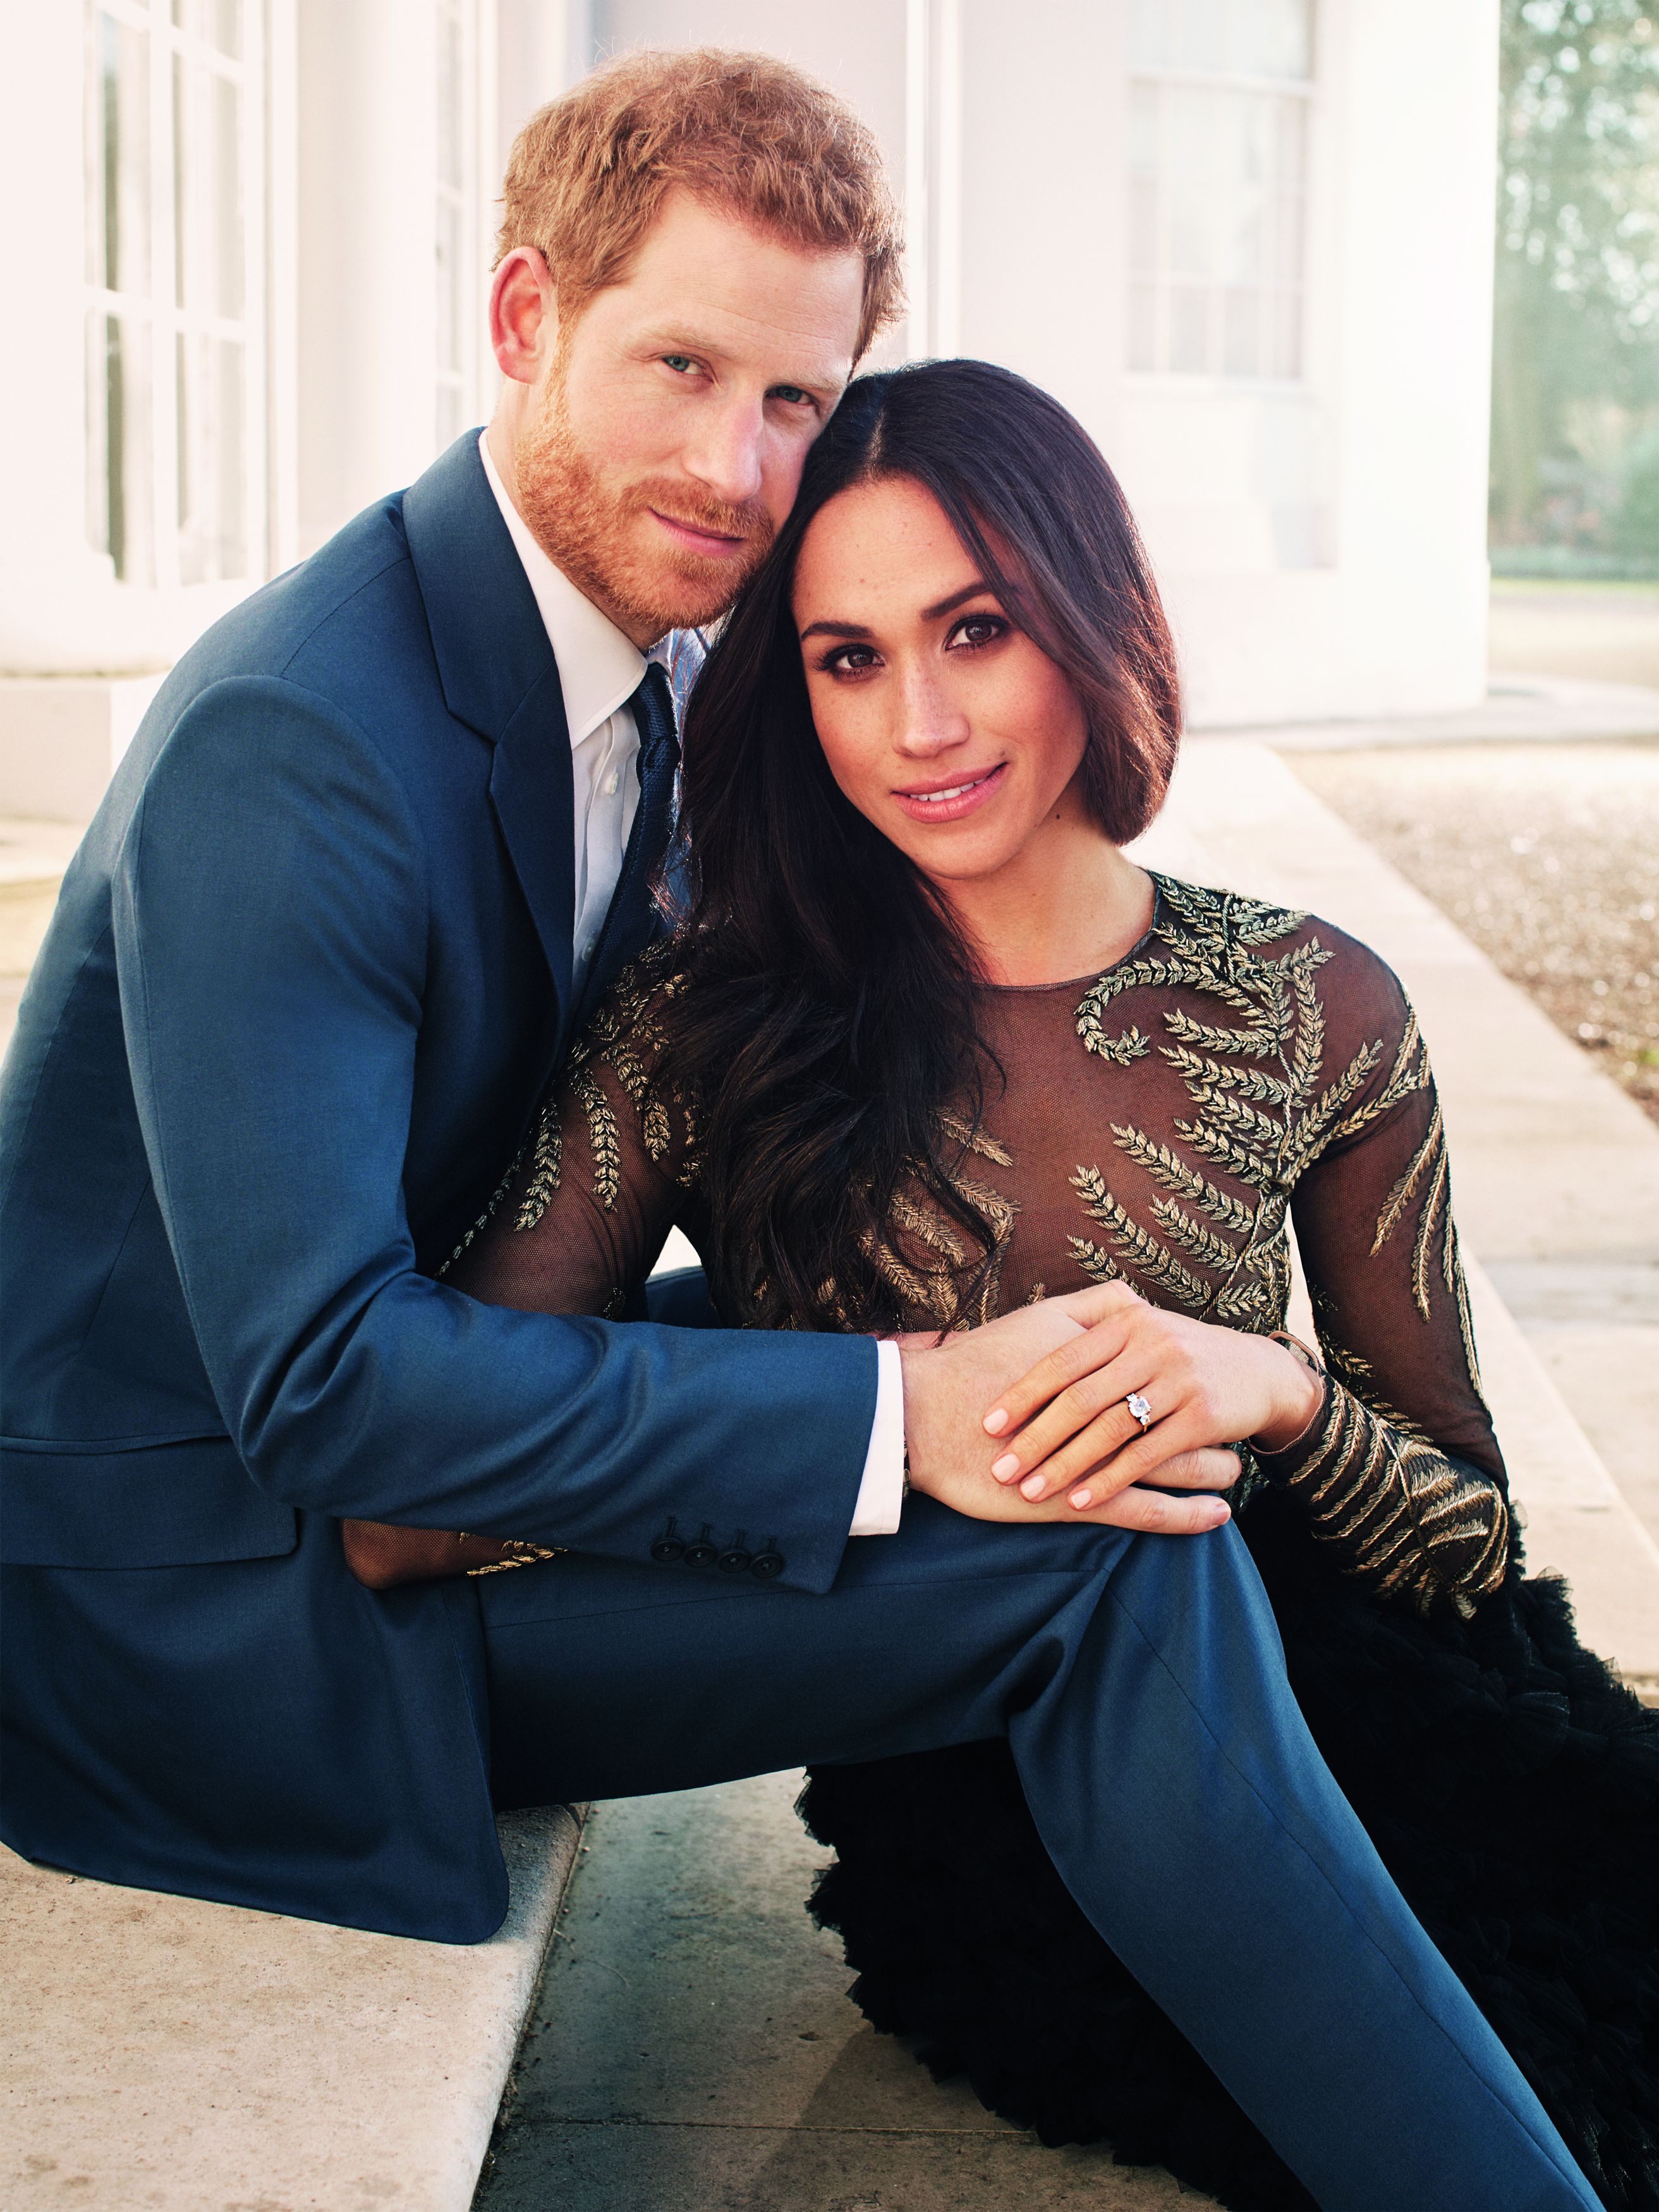 Prince Harry and eghan Markle's official engagement photo November 2017 | Source: Getty Images